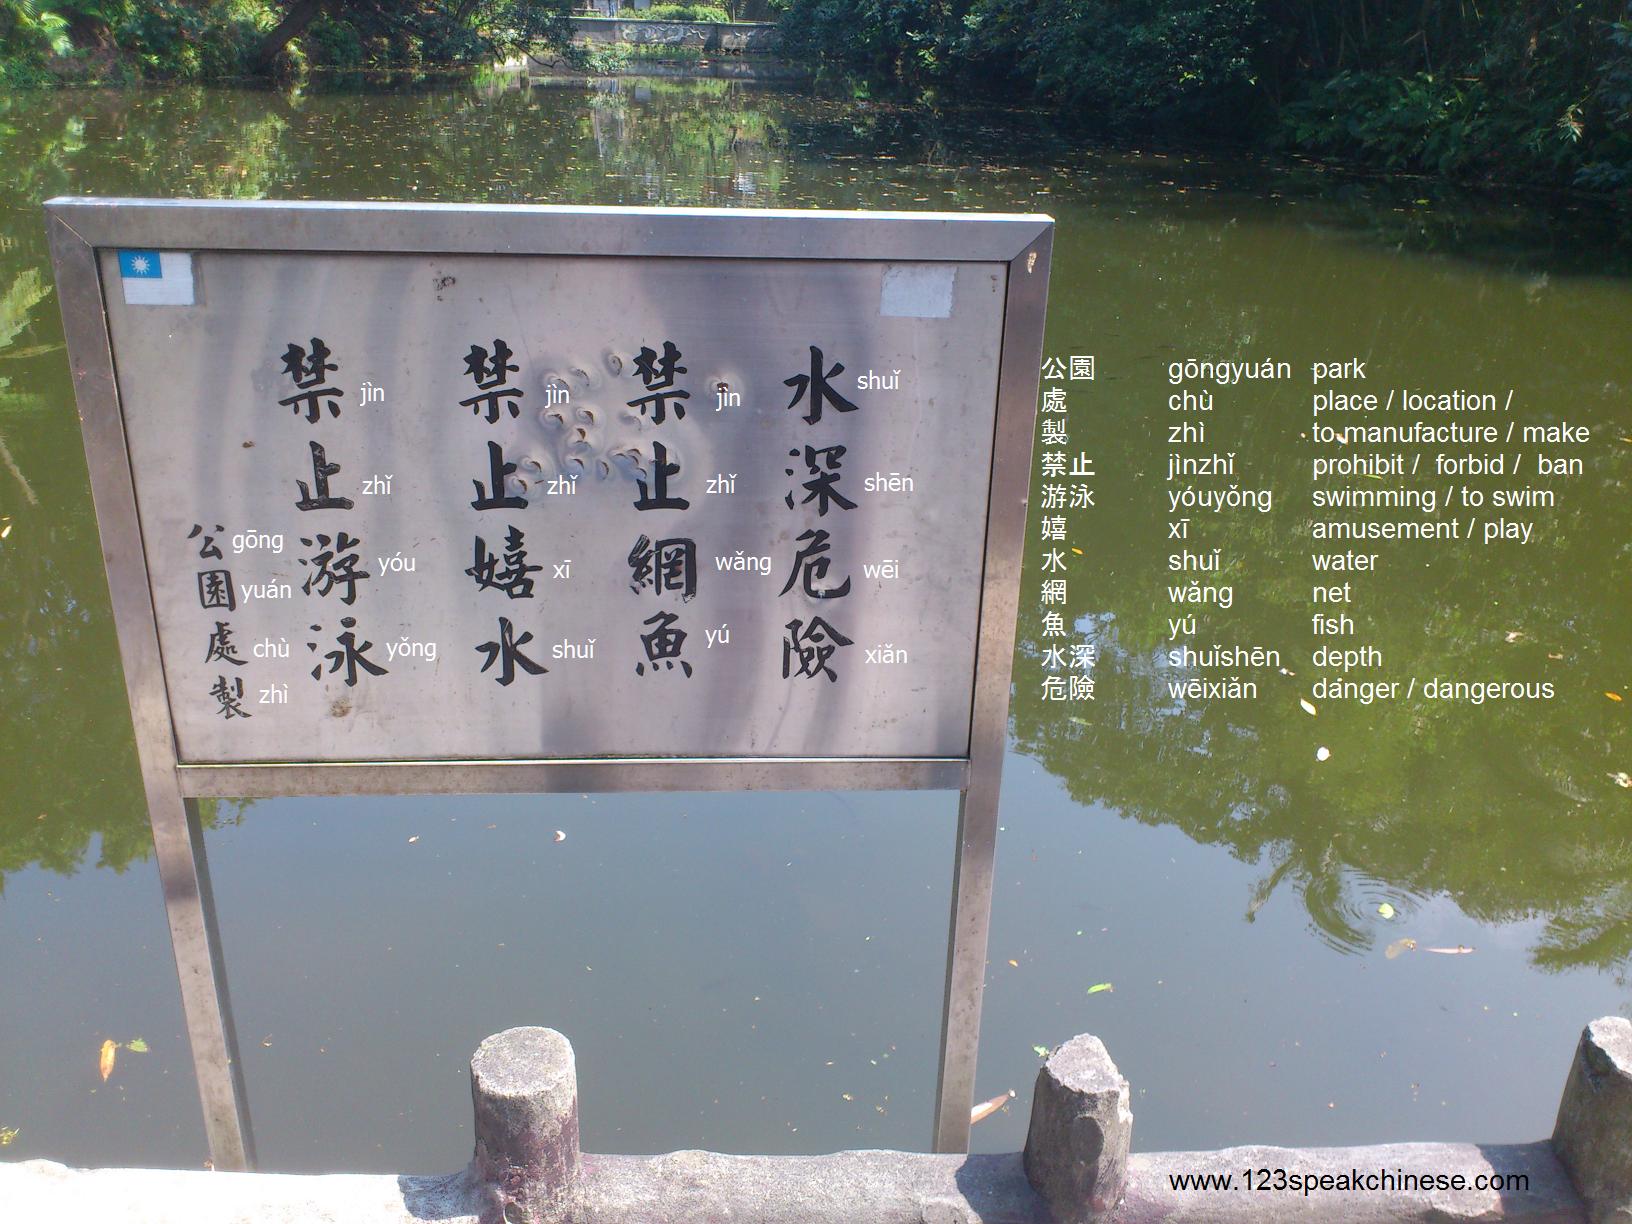 Park sign in Taiwan